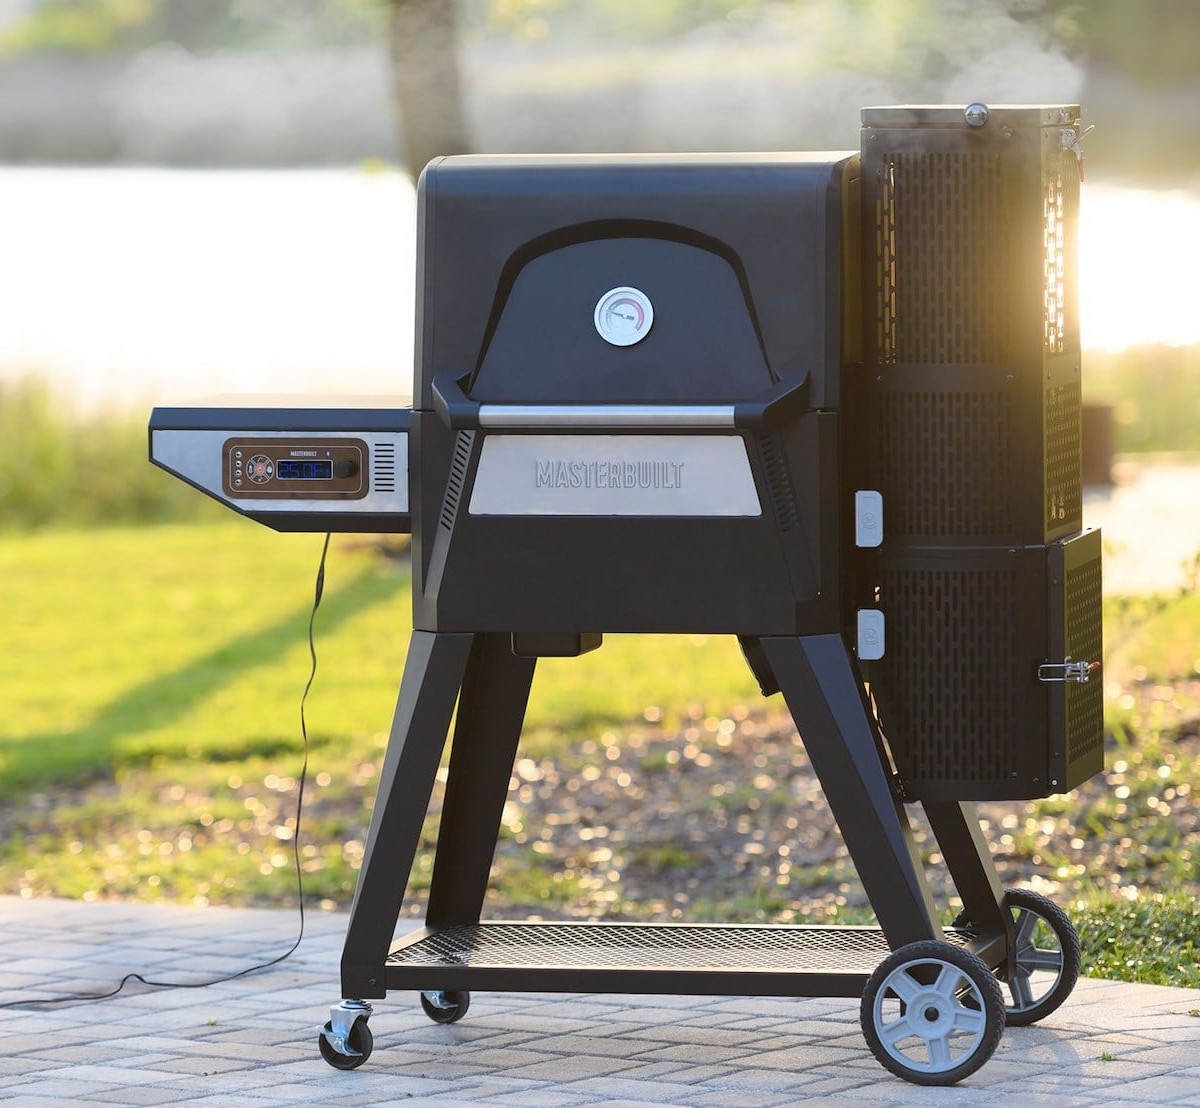 Masterbuilt Gravity Series Charcoal Grill & Smoker provides the classic flavor you know and love